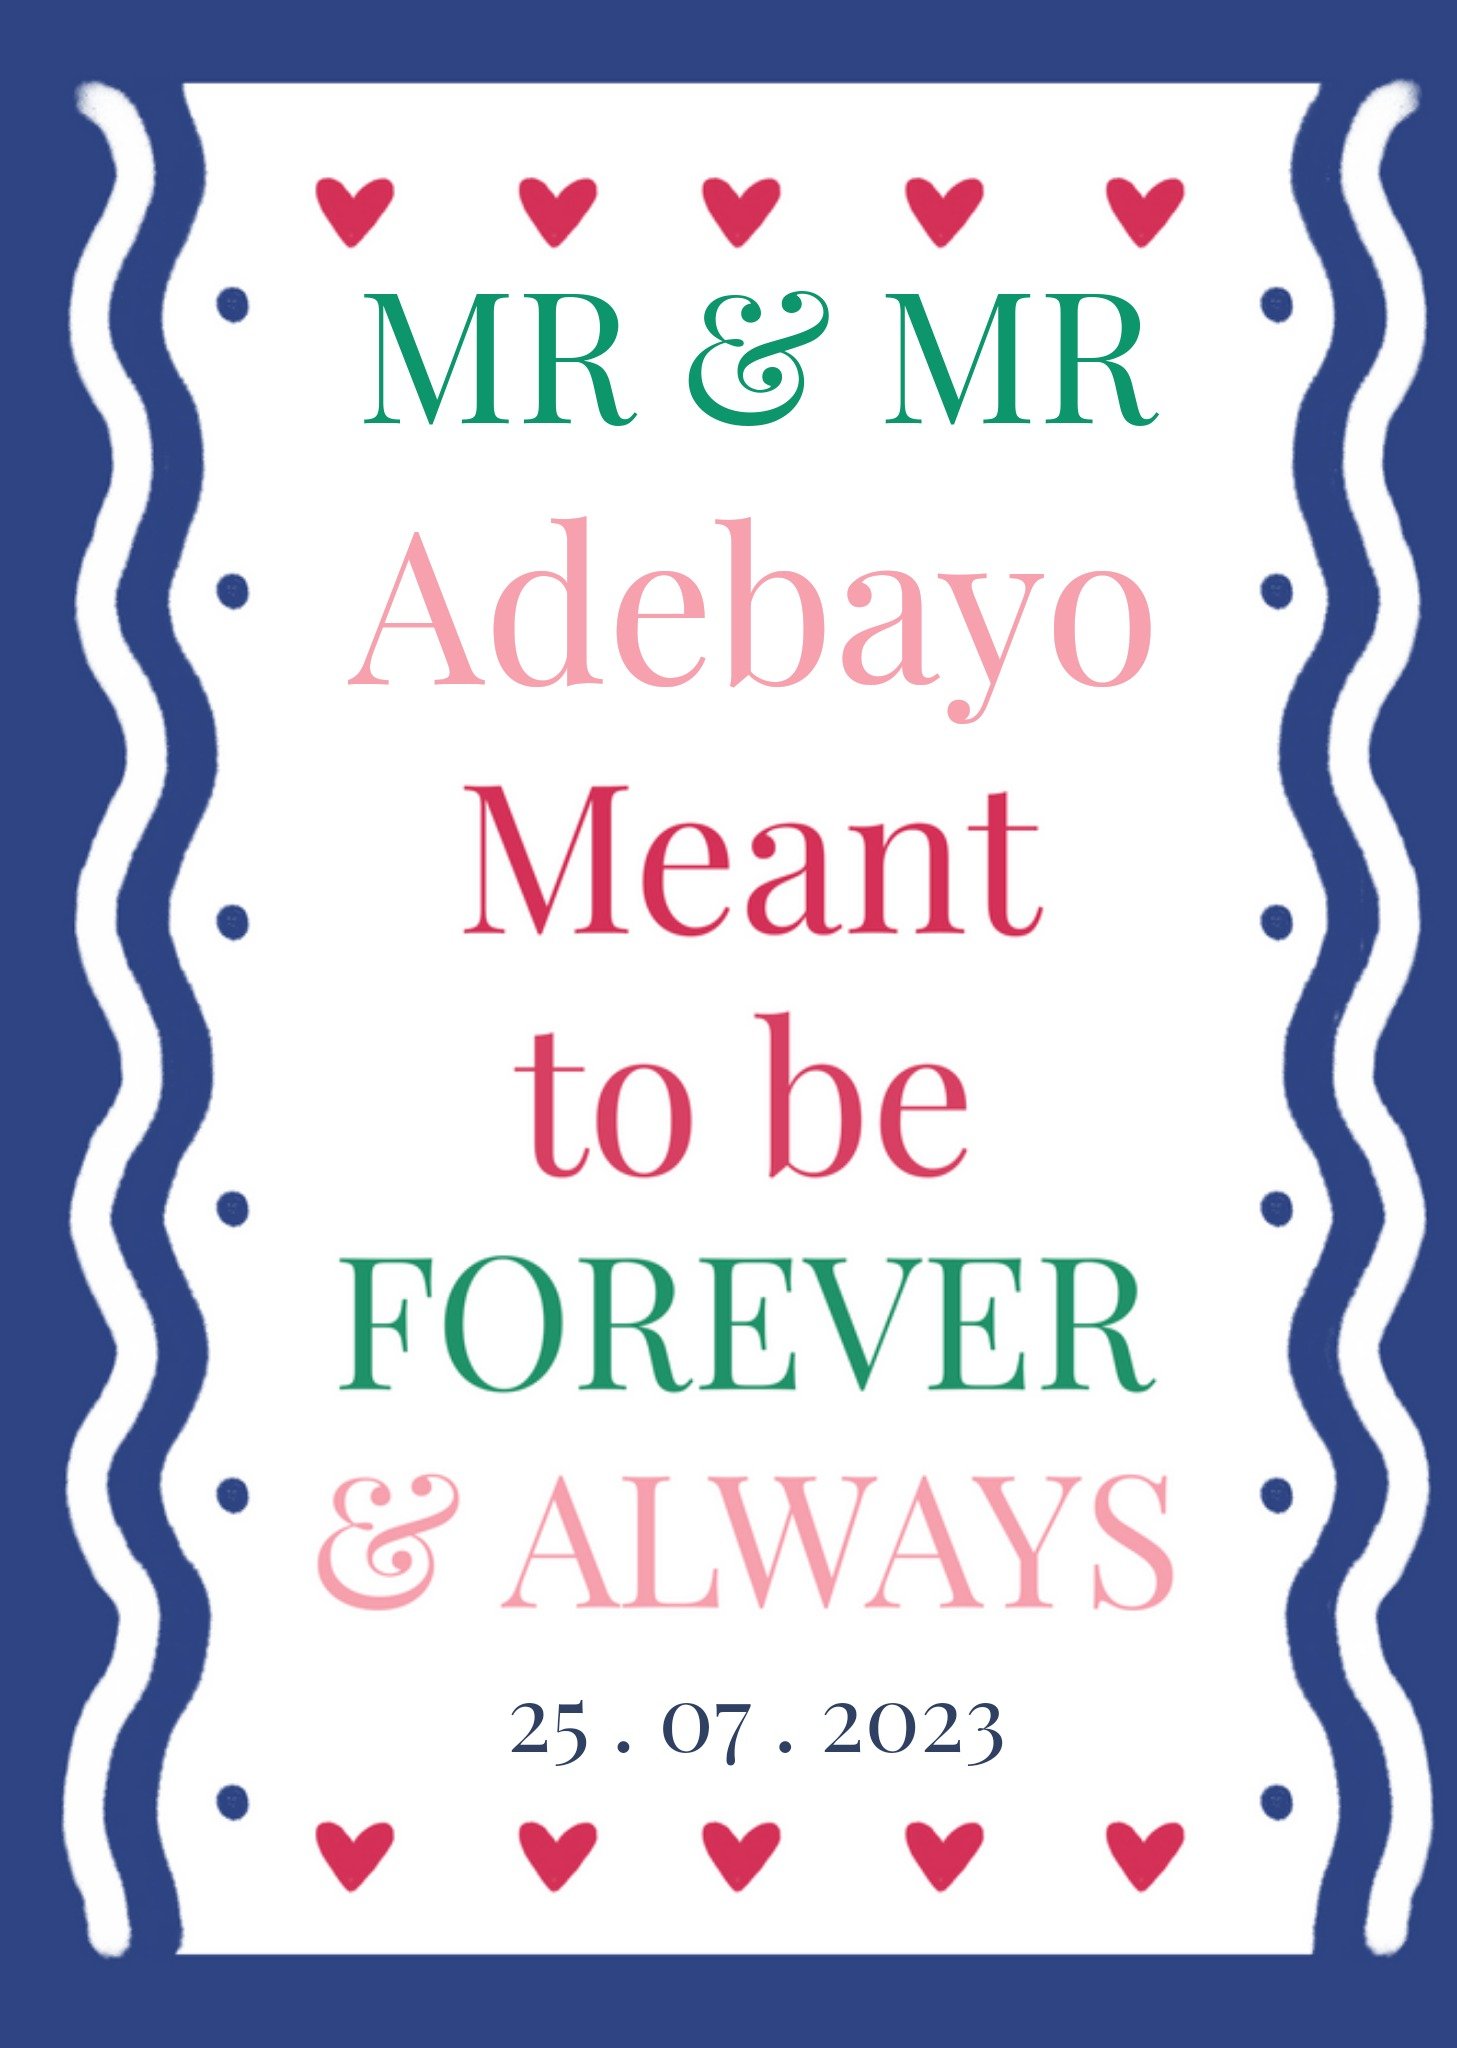 Moonpig Meant To Be Forever & Always Wedding Card Ecard